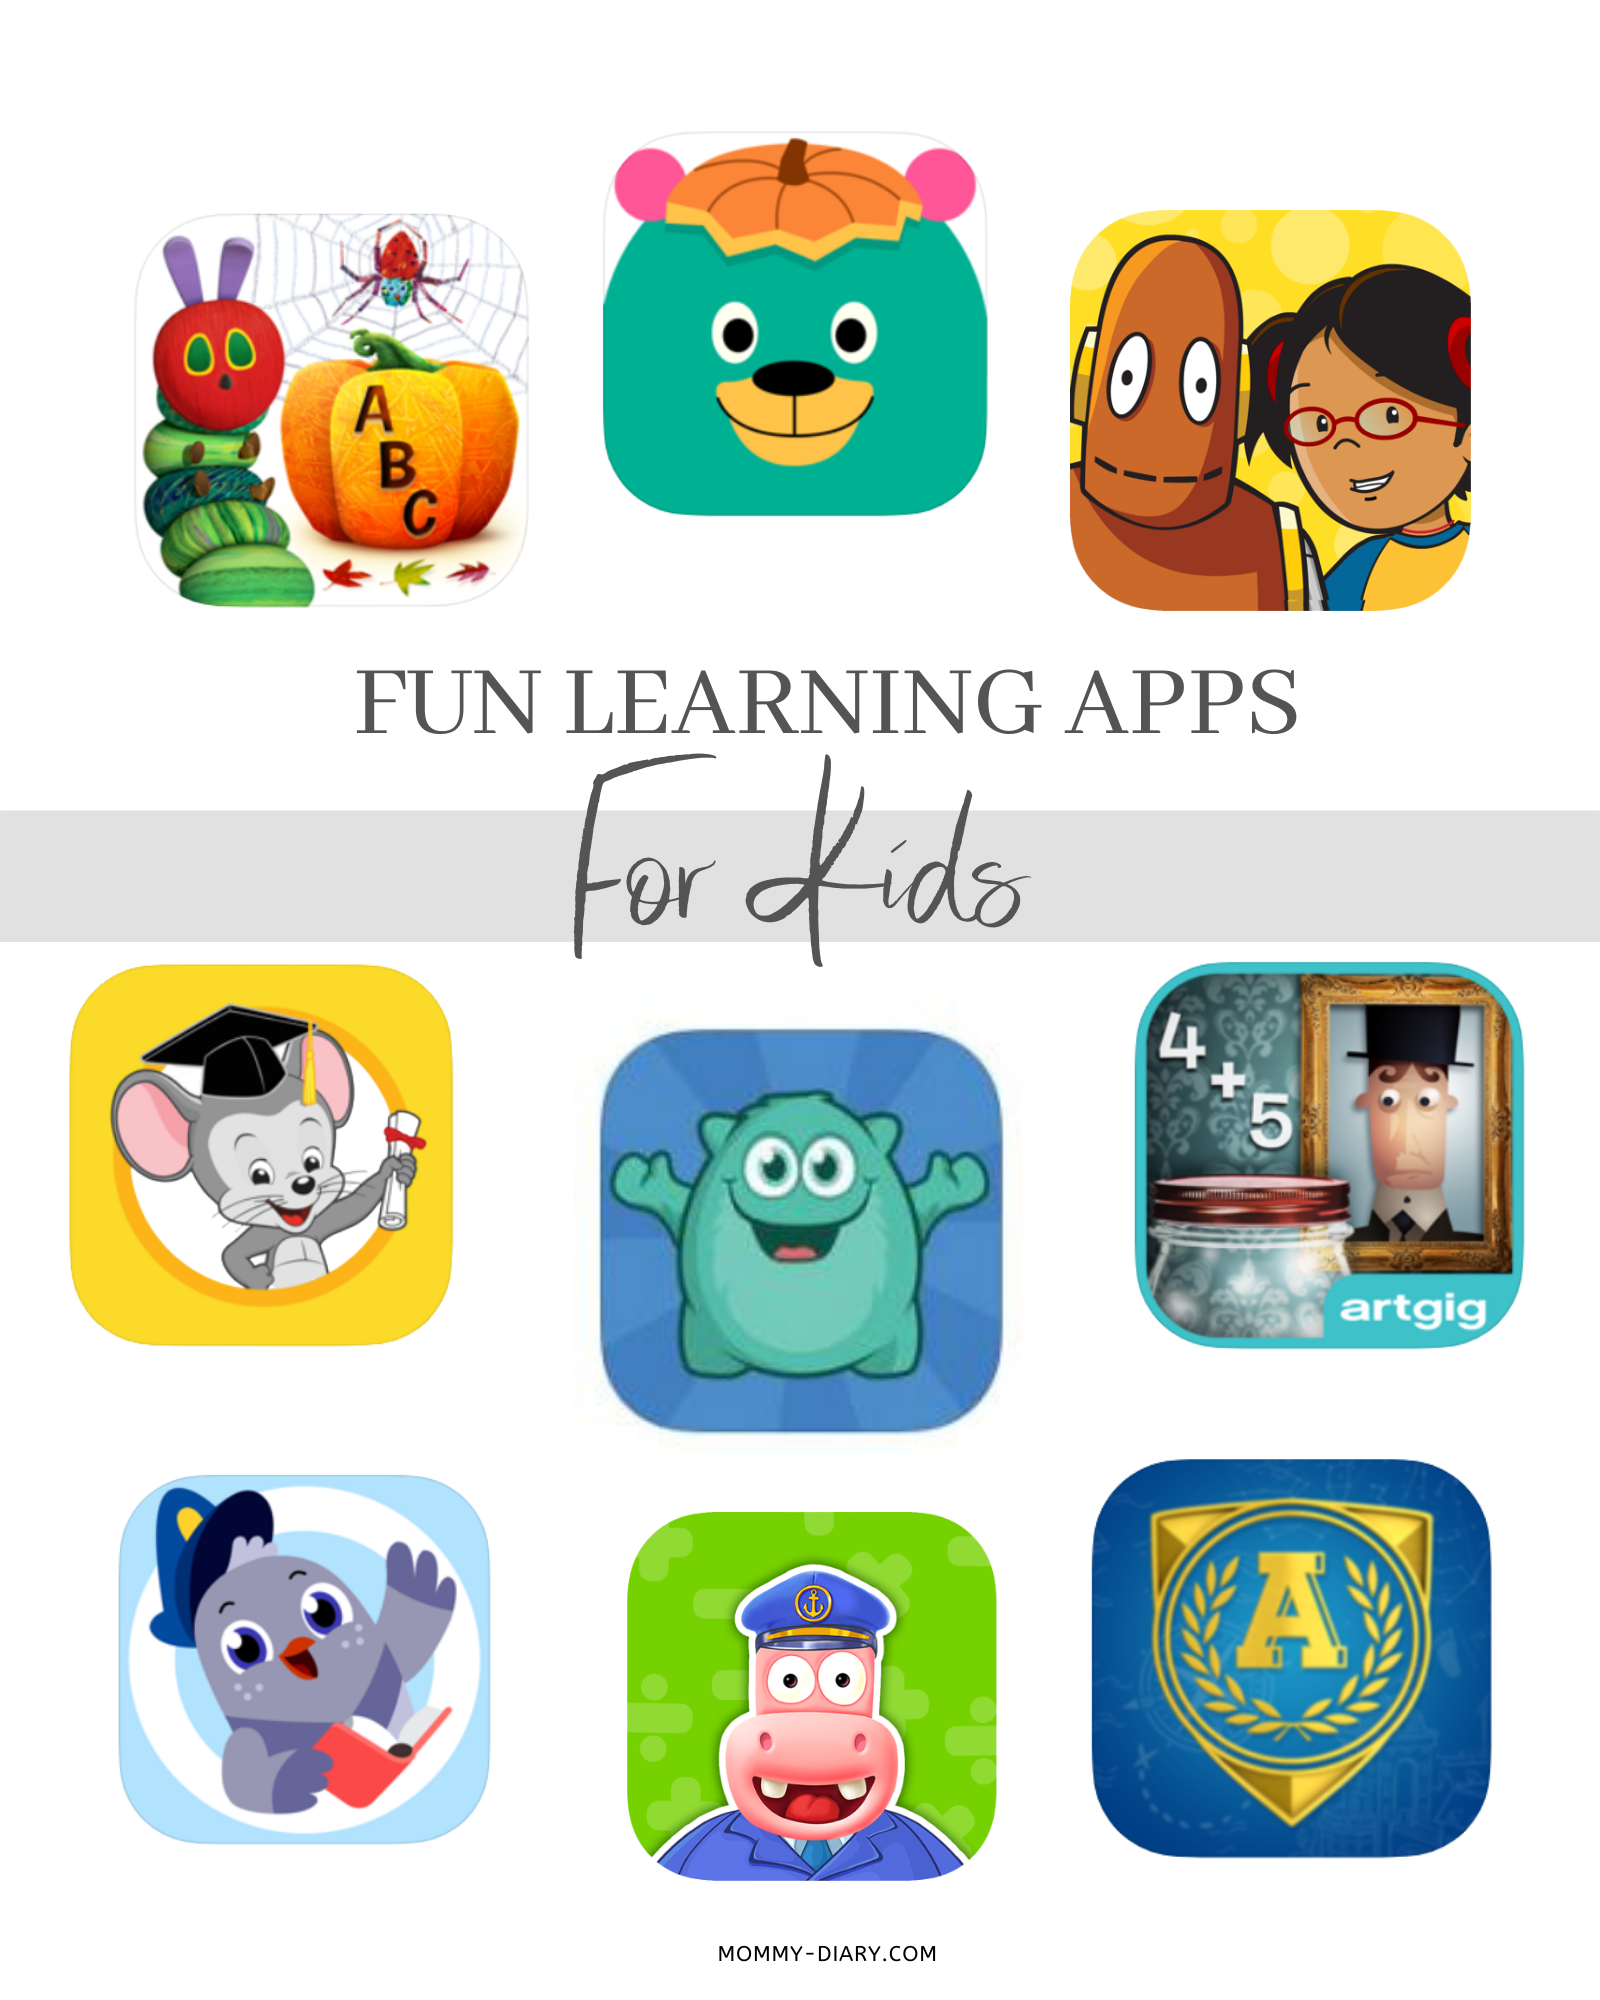 Fun Learning Apps For Kids